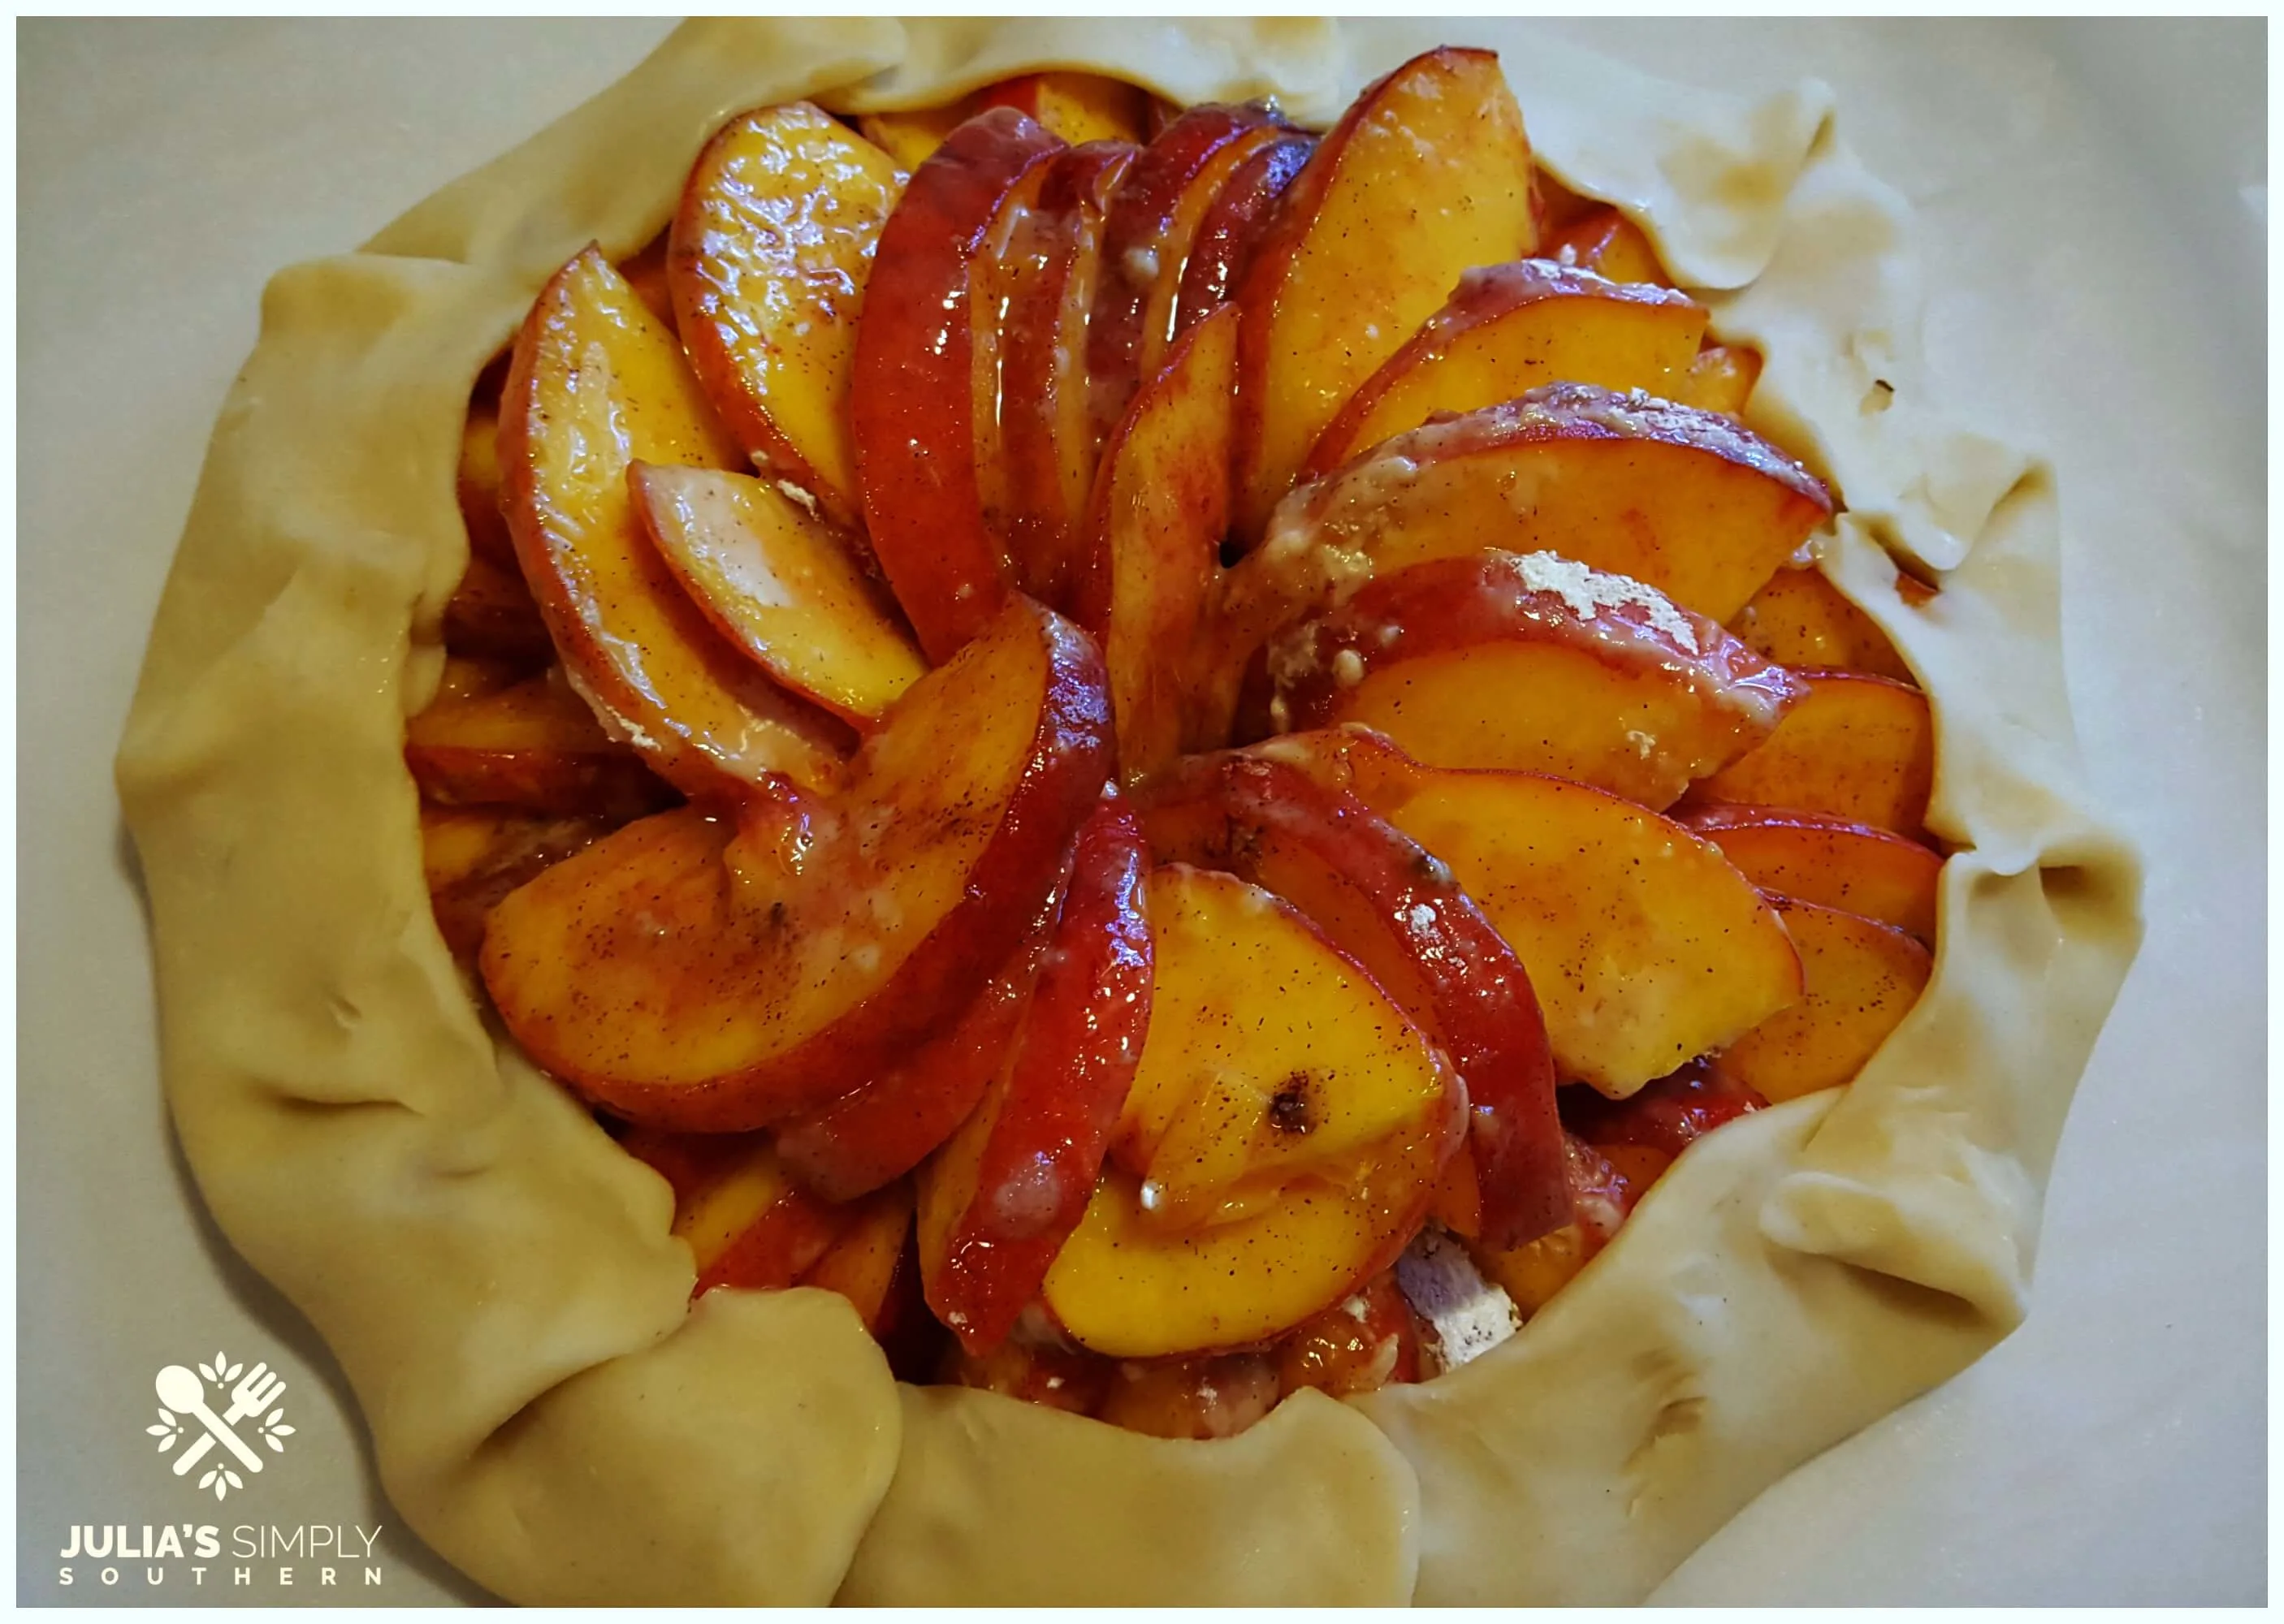 wrapping peaches in pie crust to make a galette dessert